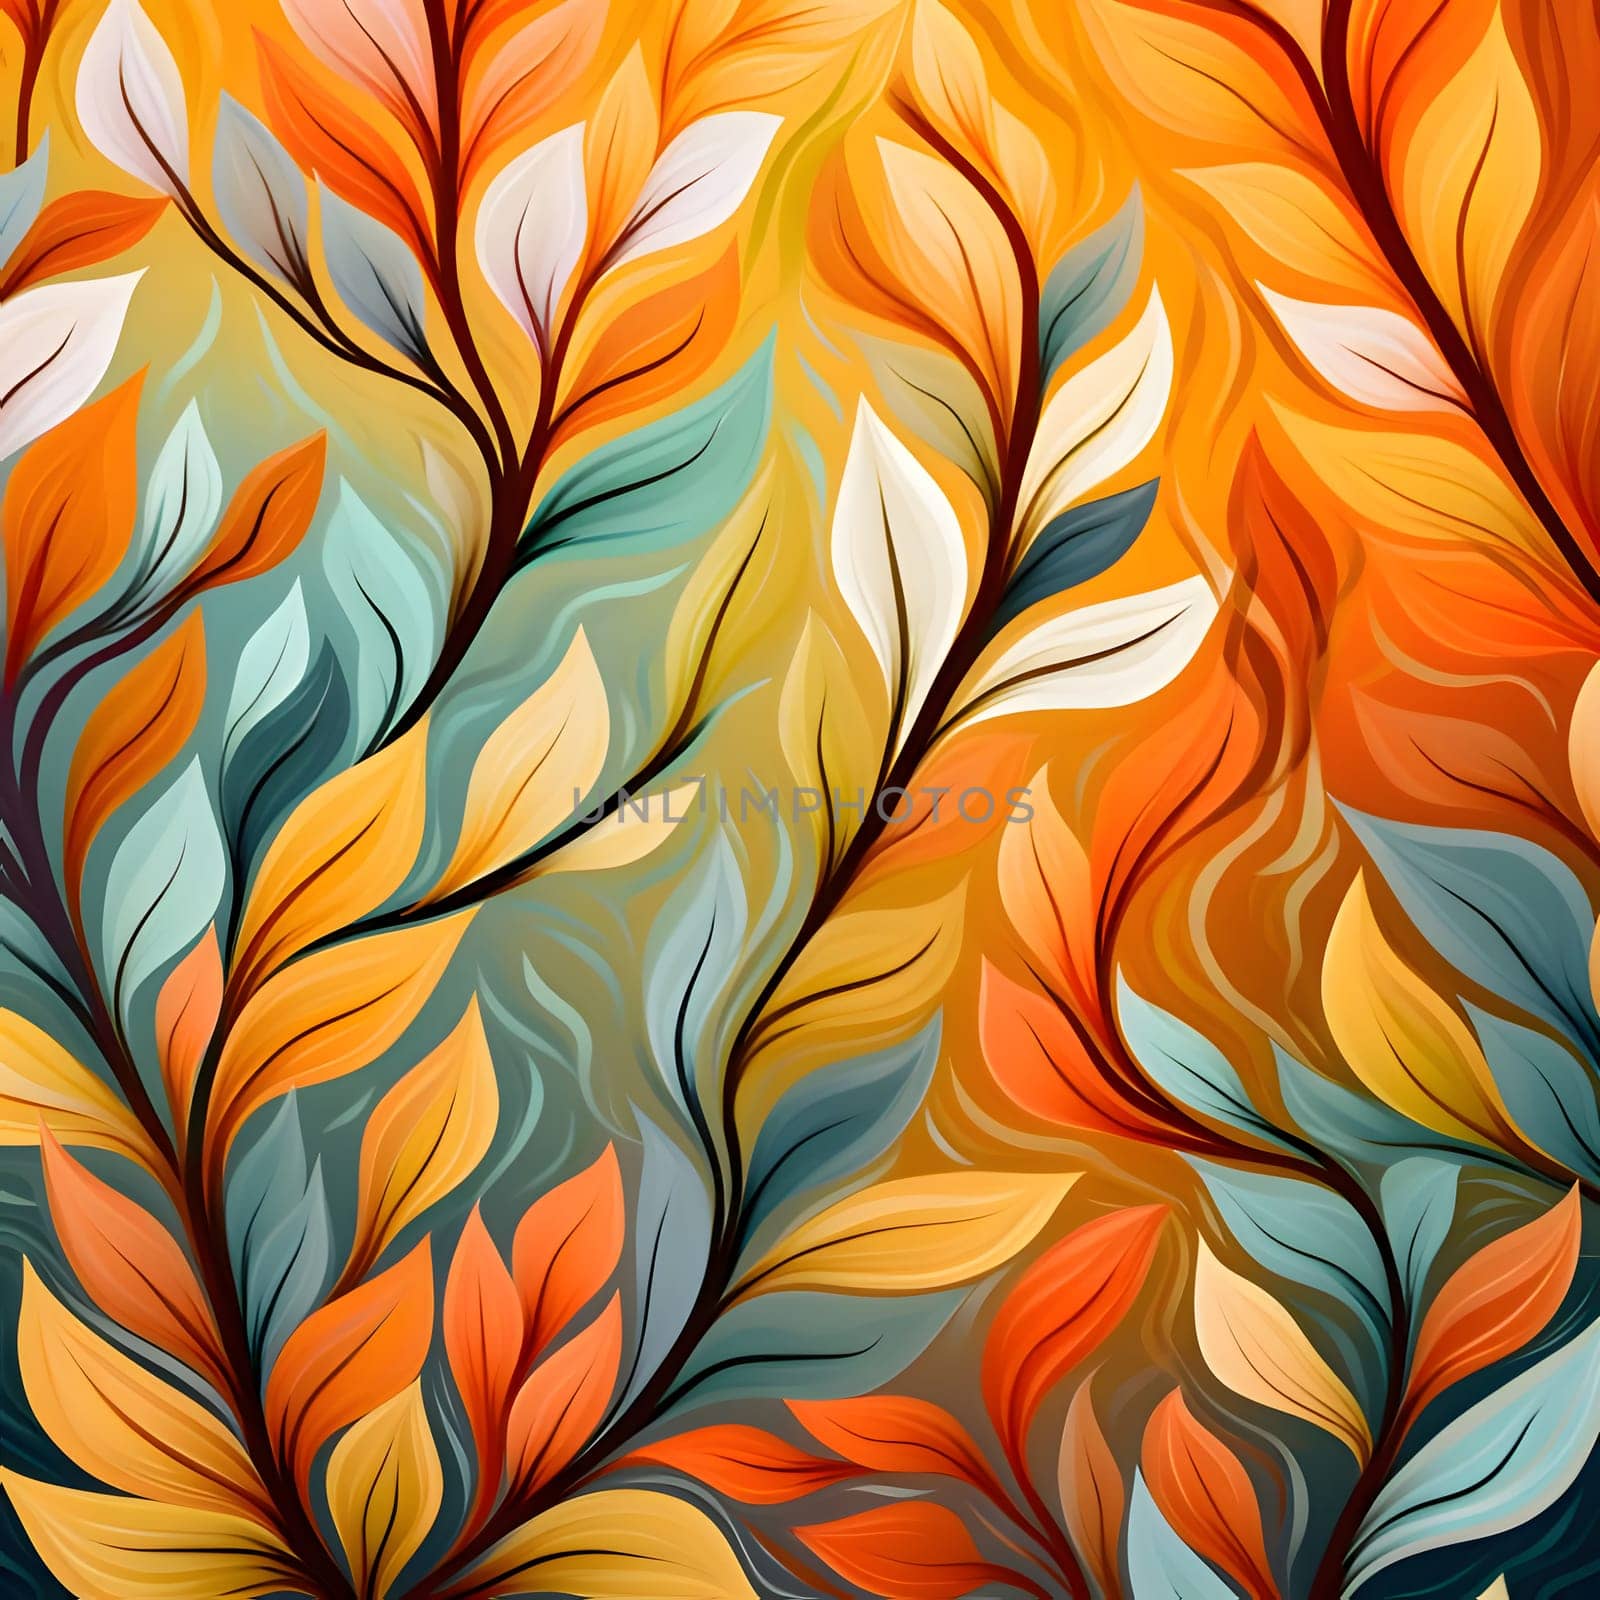 Patterns and banners backgrounds: Seamless background pattern. Abstract leaves pattern. Vector illustration.